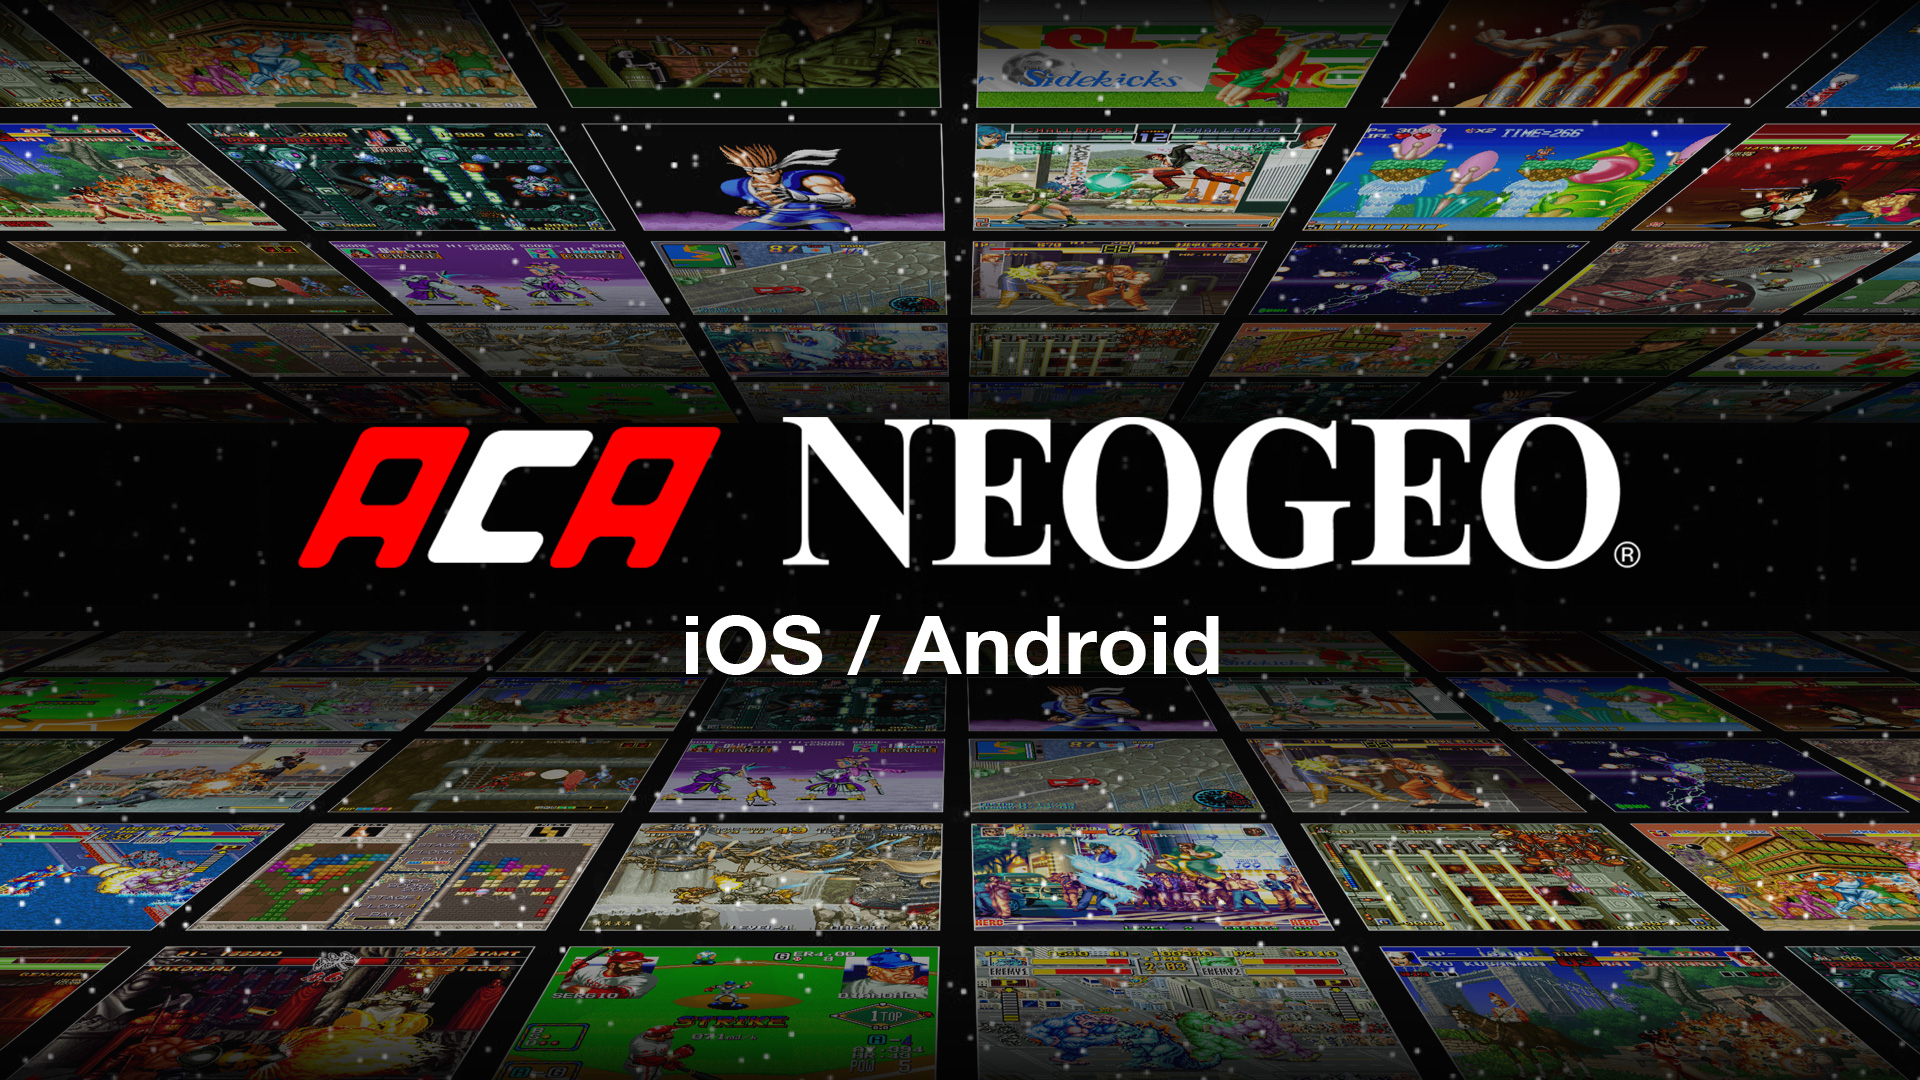 The ACA NeoGeo Series Debuts On IOS And Android With Metal Slug 5, Samurai Shodown IV, And Alpha Mission II Out Now And More To Come